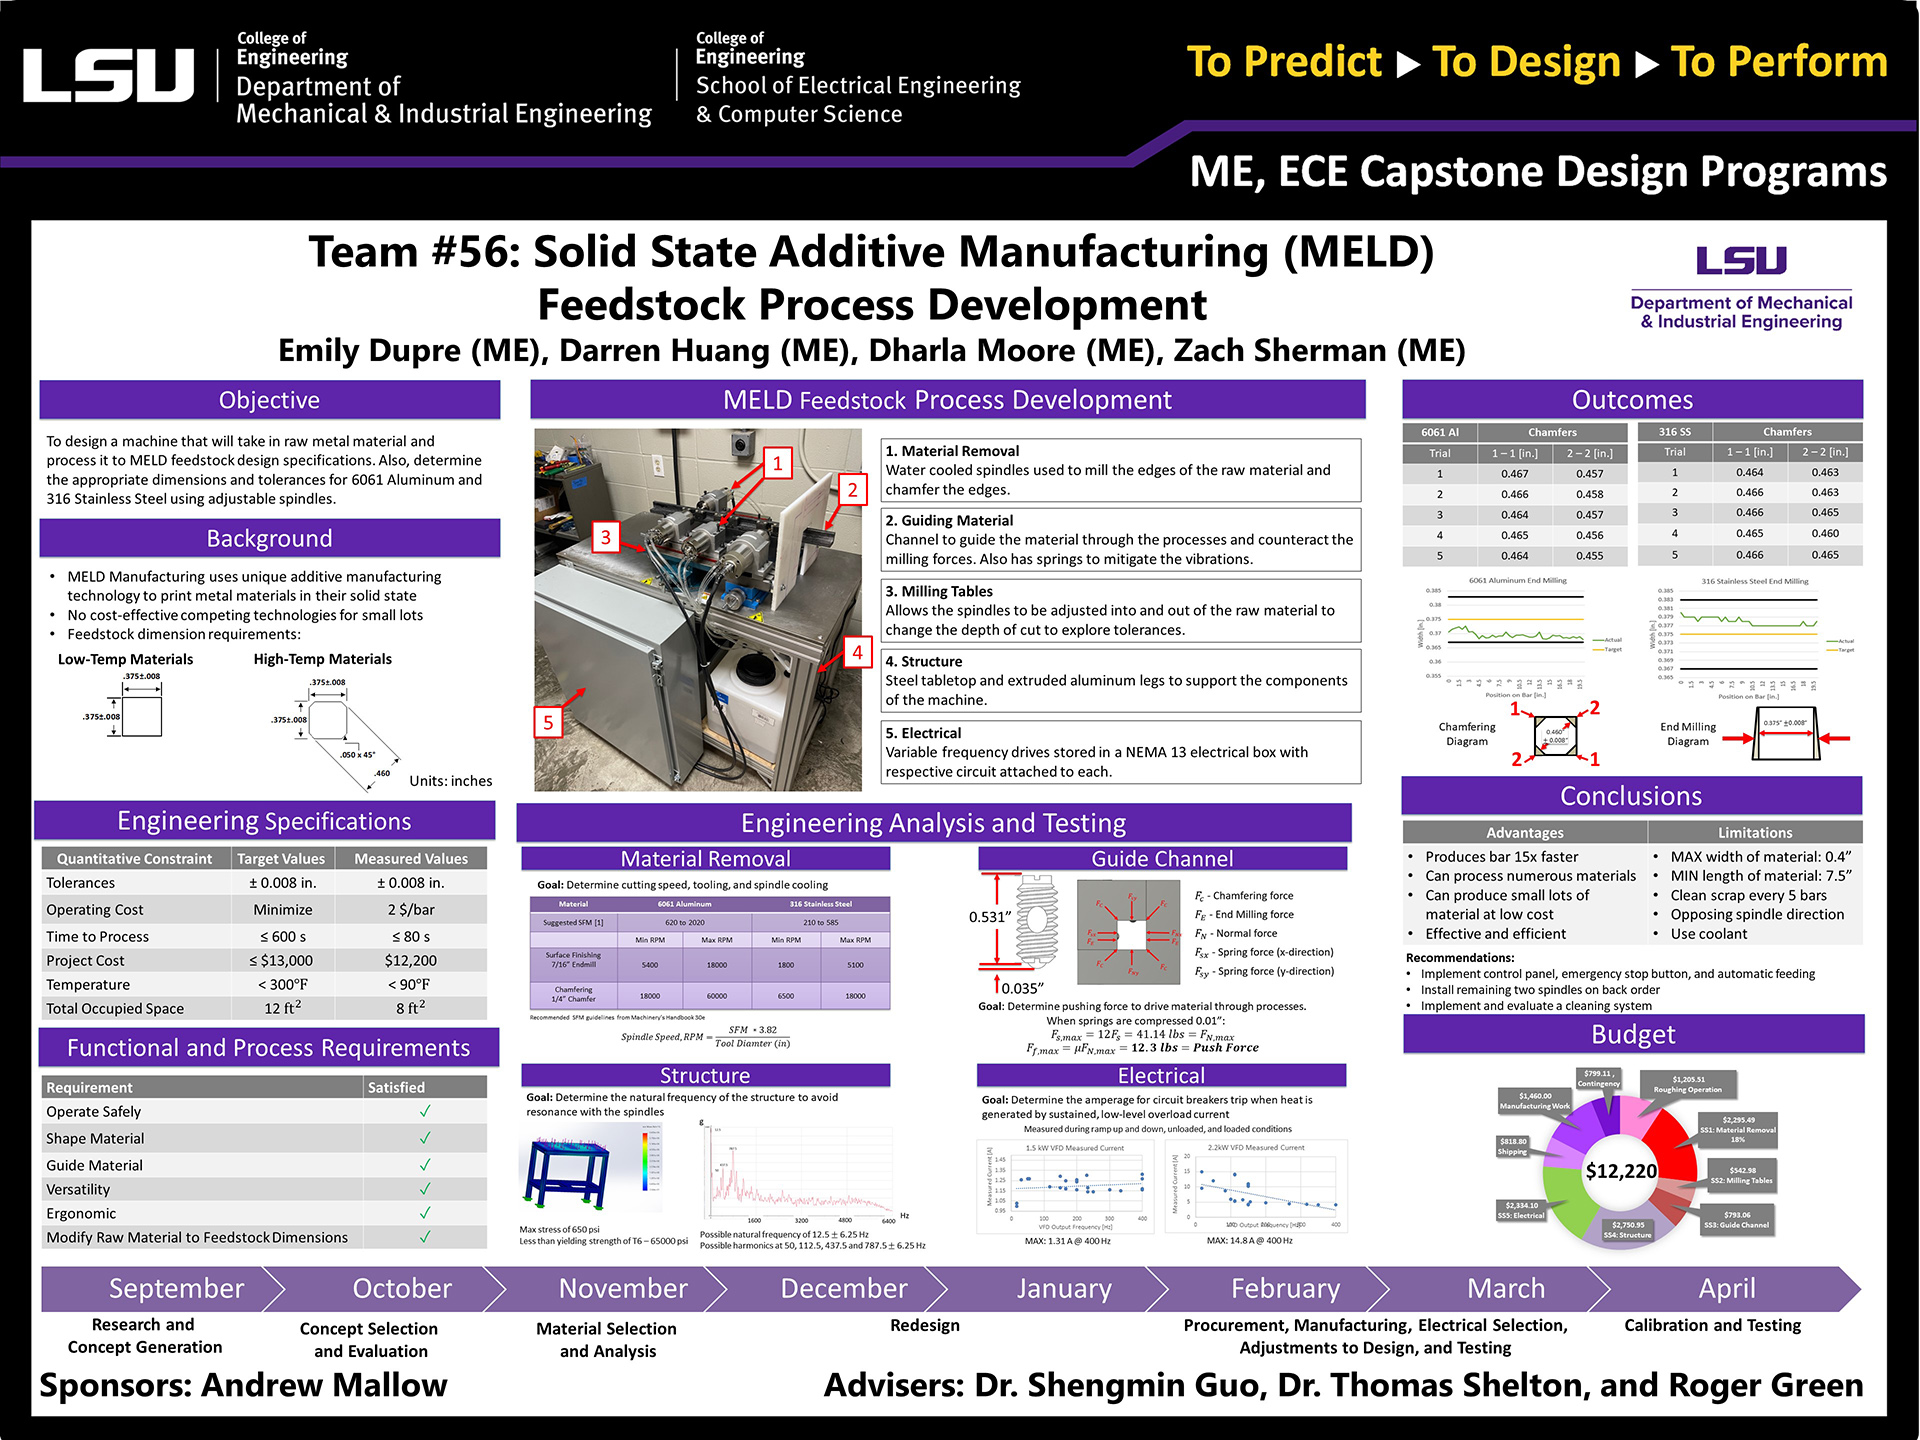 Project 56: Solid State Additive Manufacturing (MELD) Feedstock Process Development (2022)